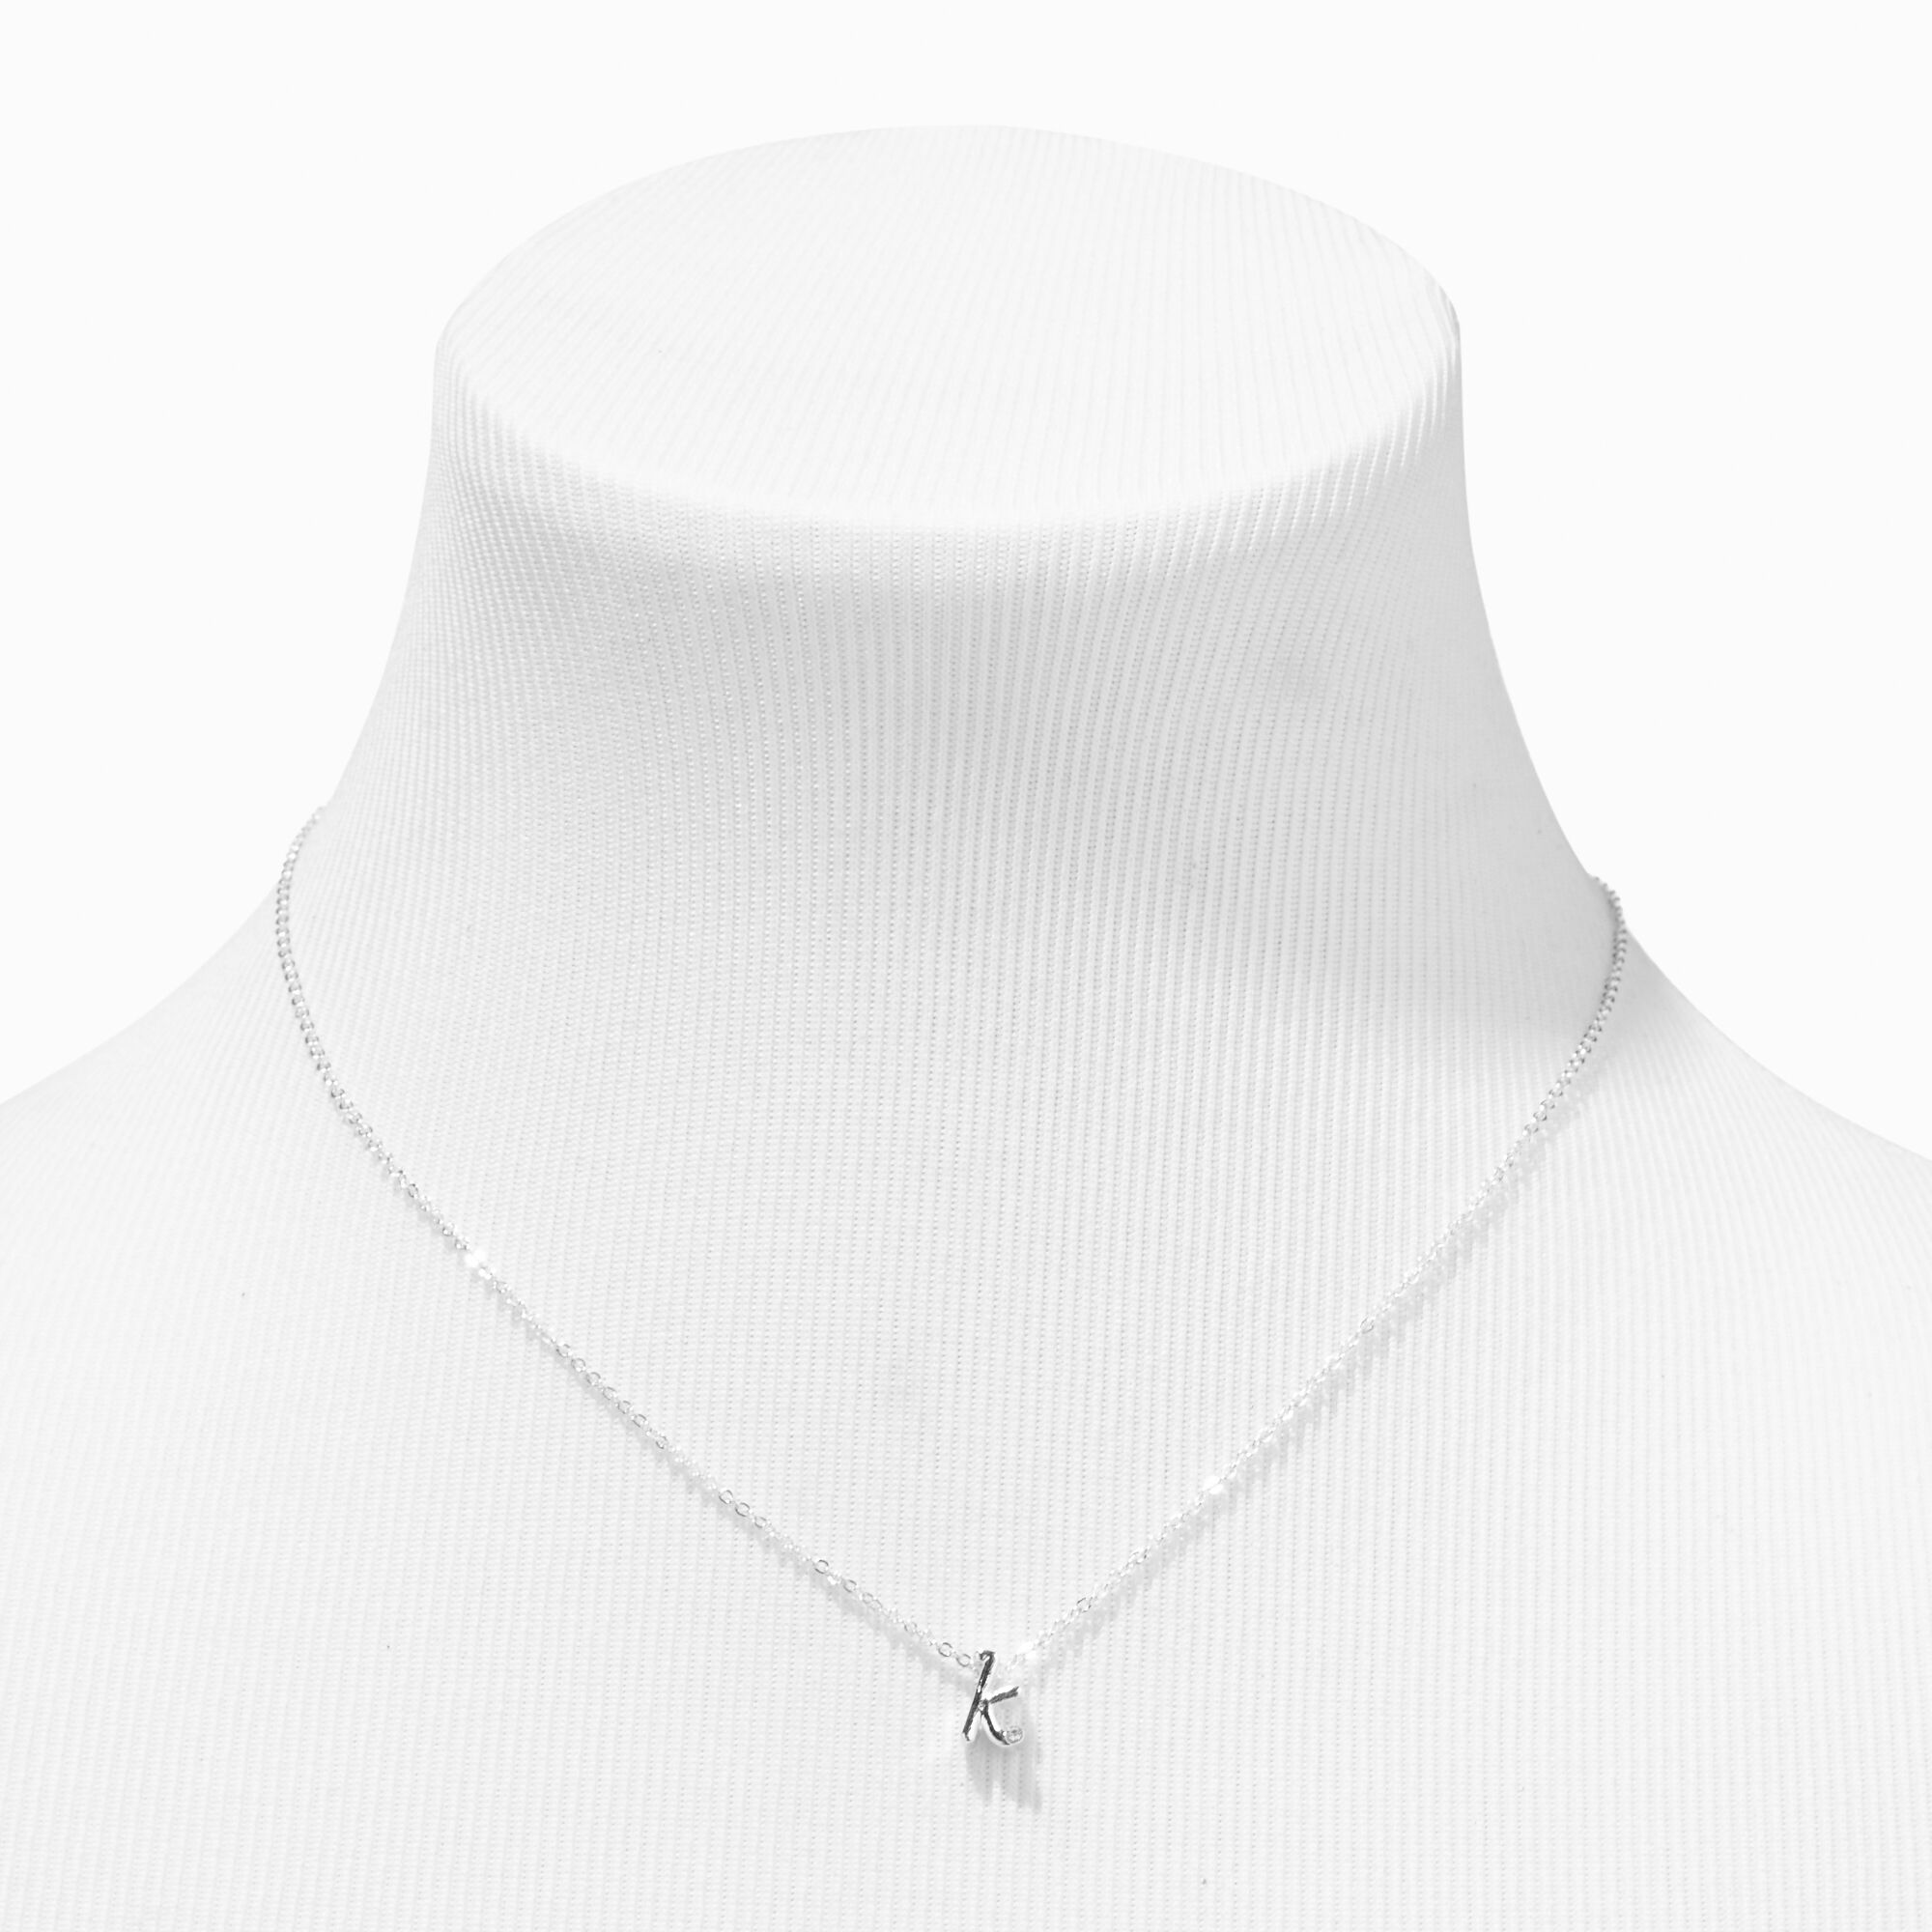 Tiffany & Co Sterling Picasso Necklace | Purple Creek